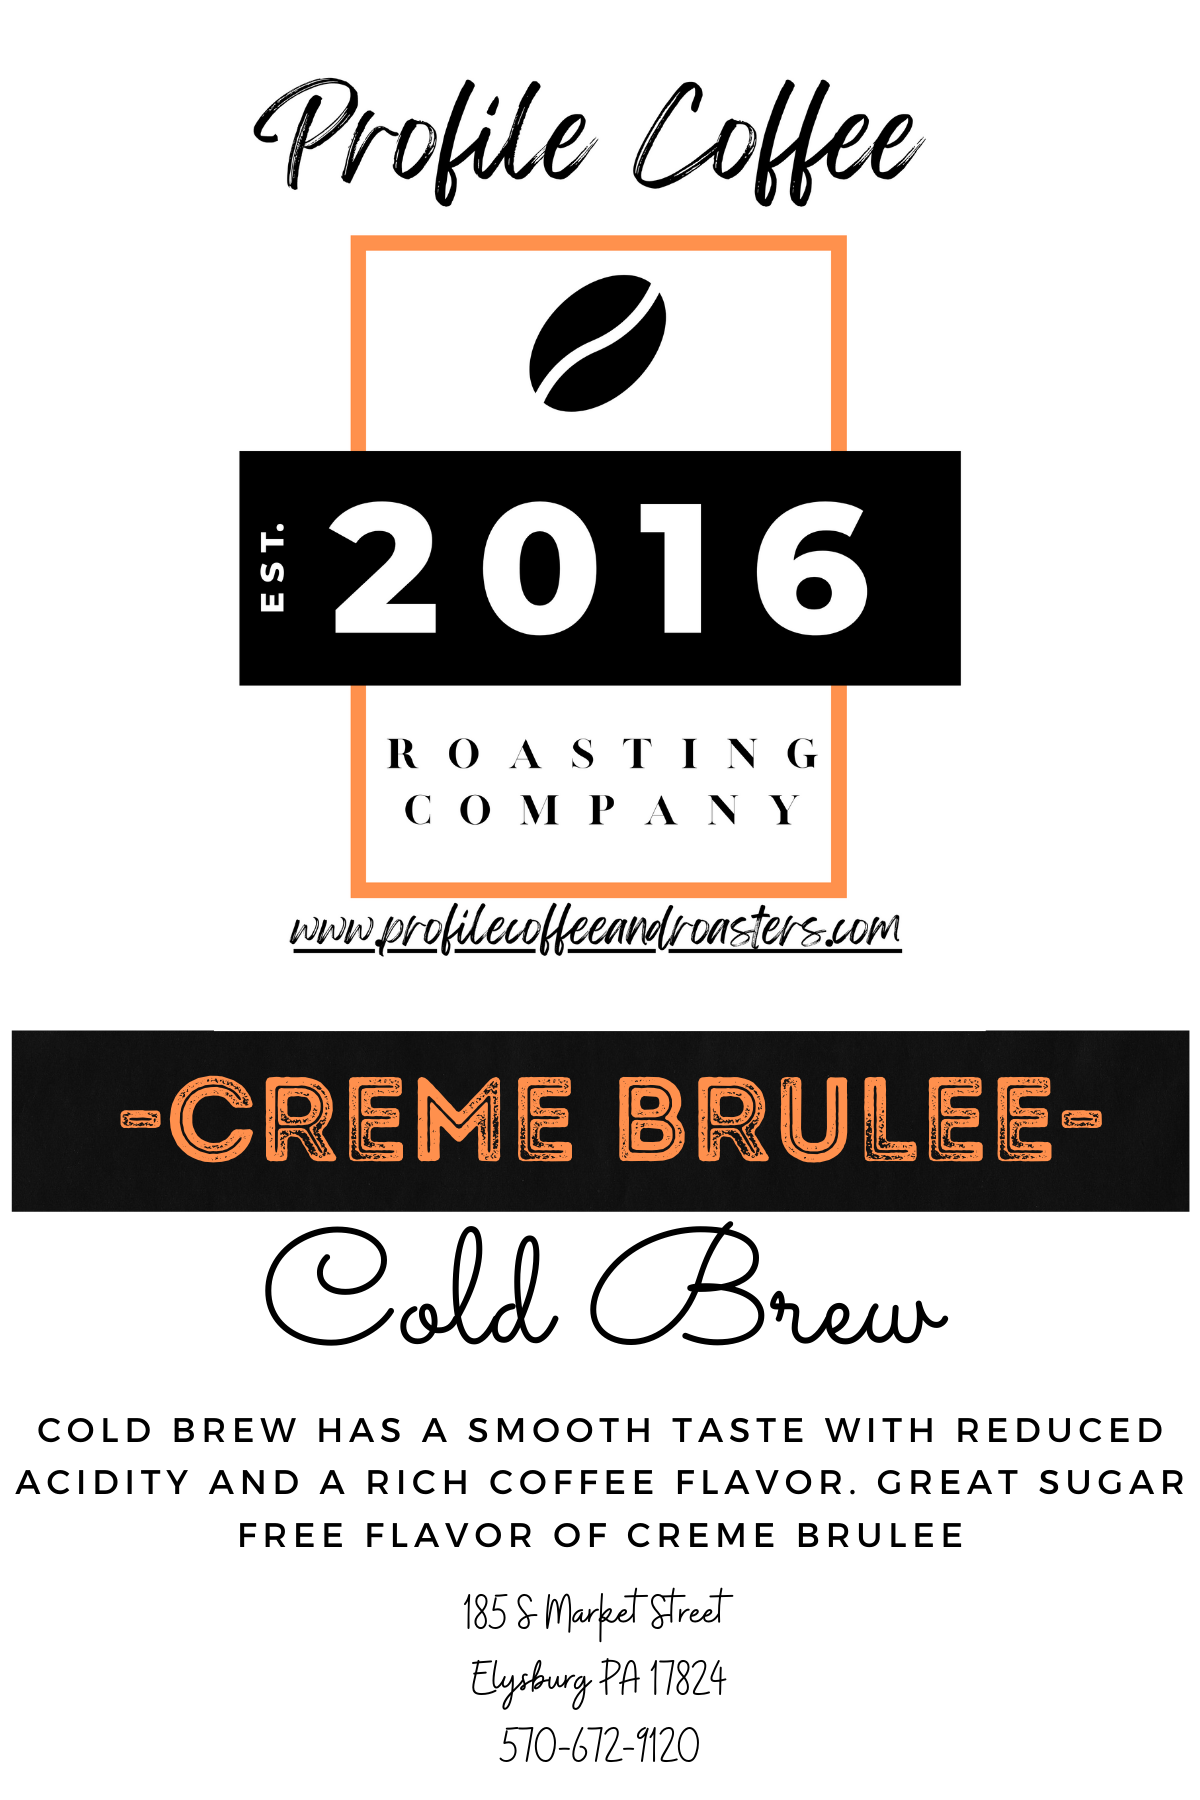 Fresh Roasted Cold Brew Blends by Profile cremebrulee